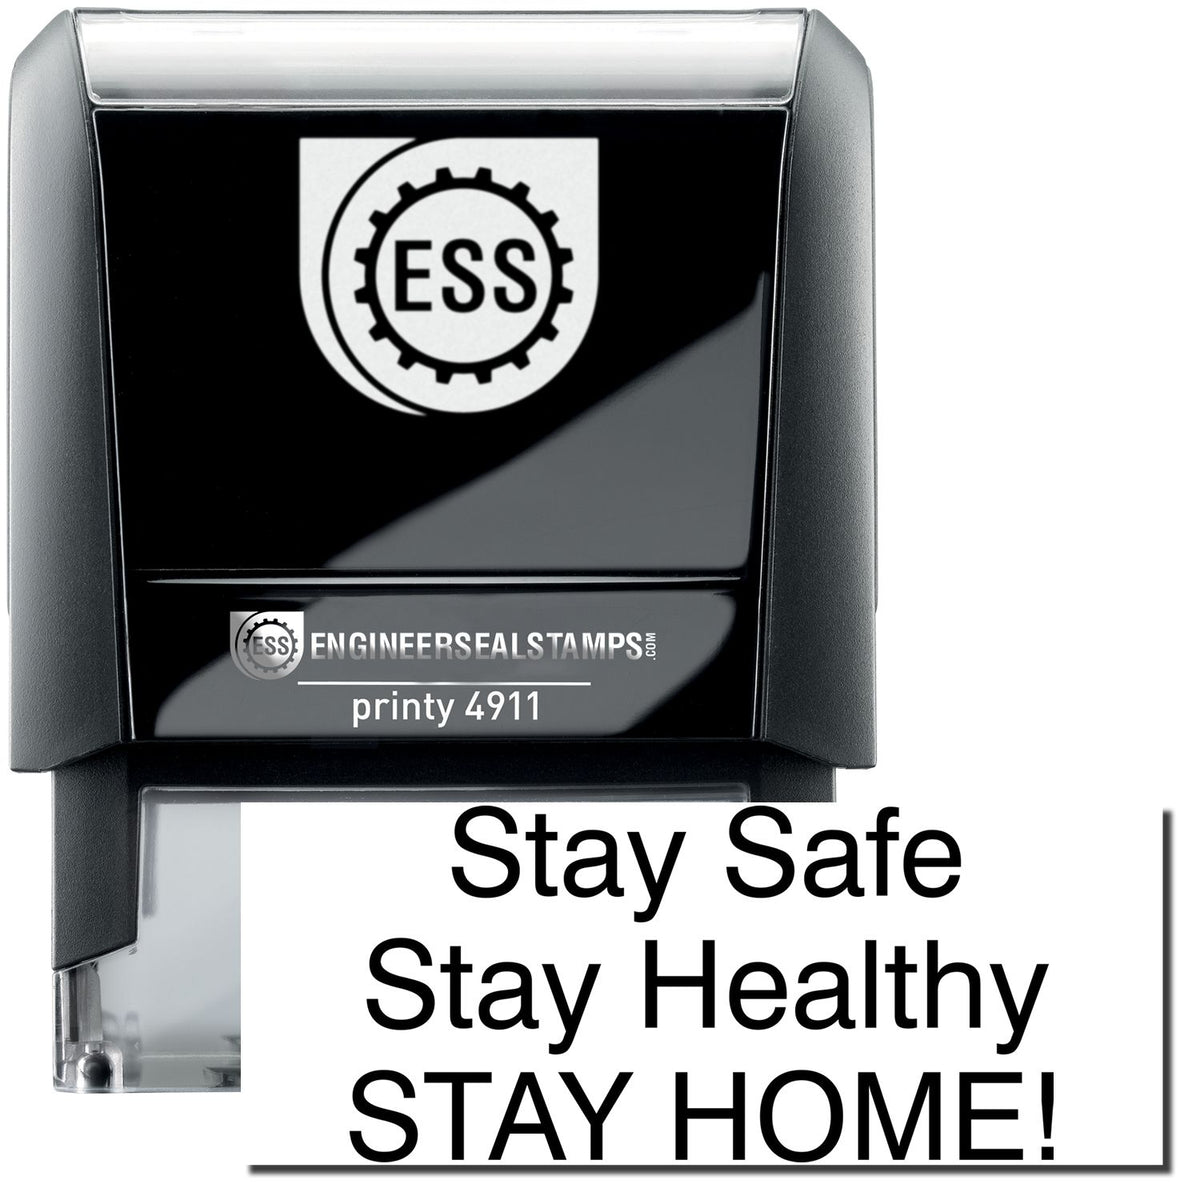 A self-inking stamp with a stamped image showing how the text &quot;Stay Safe Stay Healthy STAY HOME!&quot; is displayed after stamping.